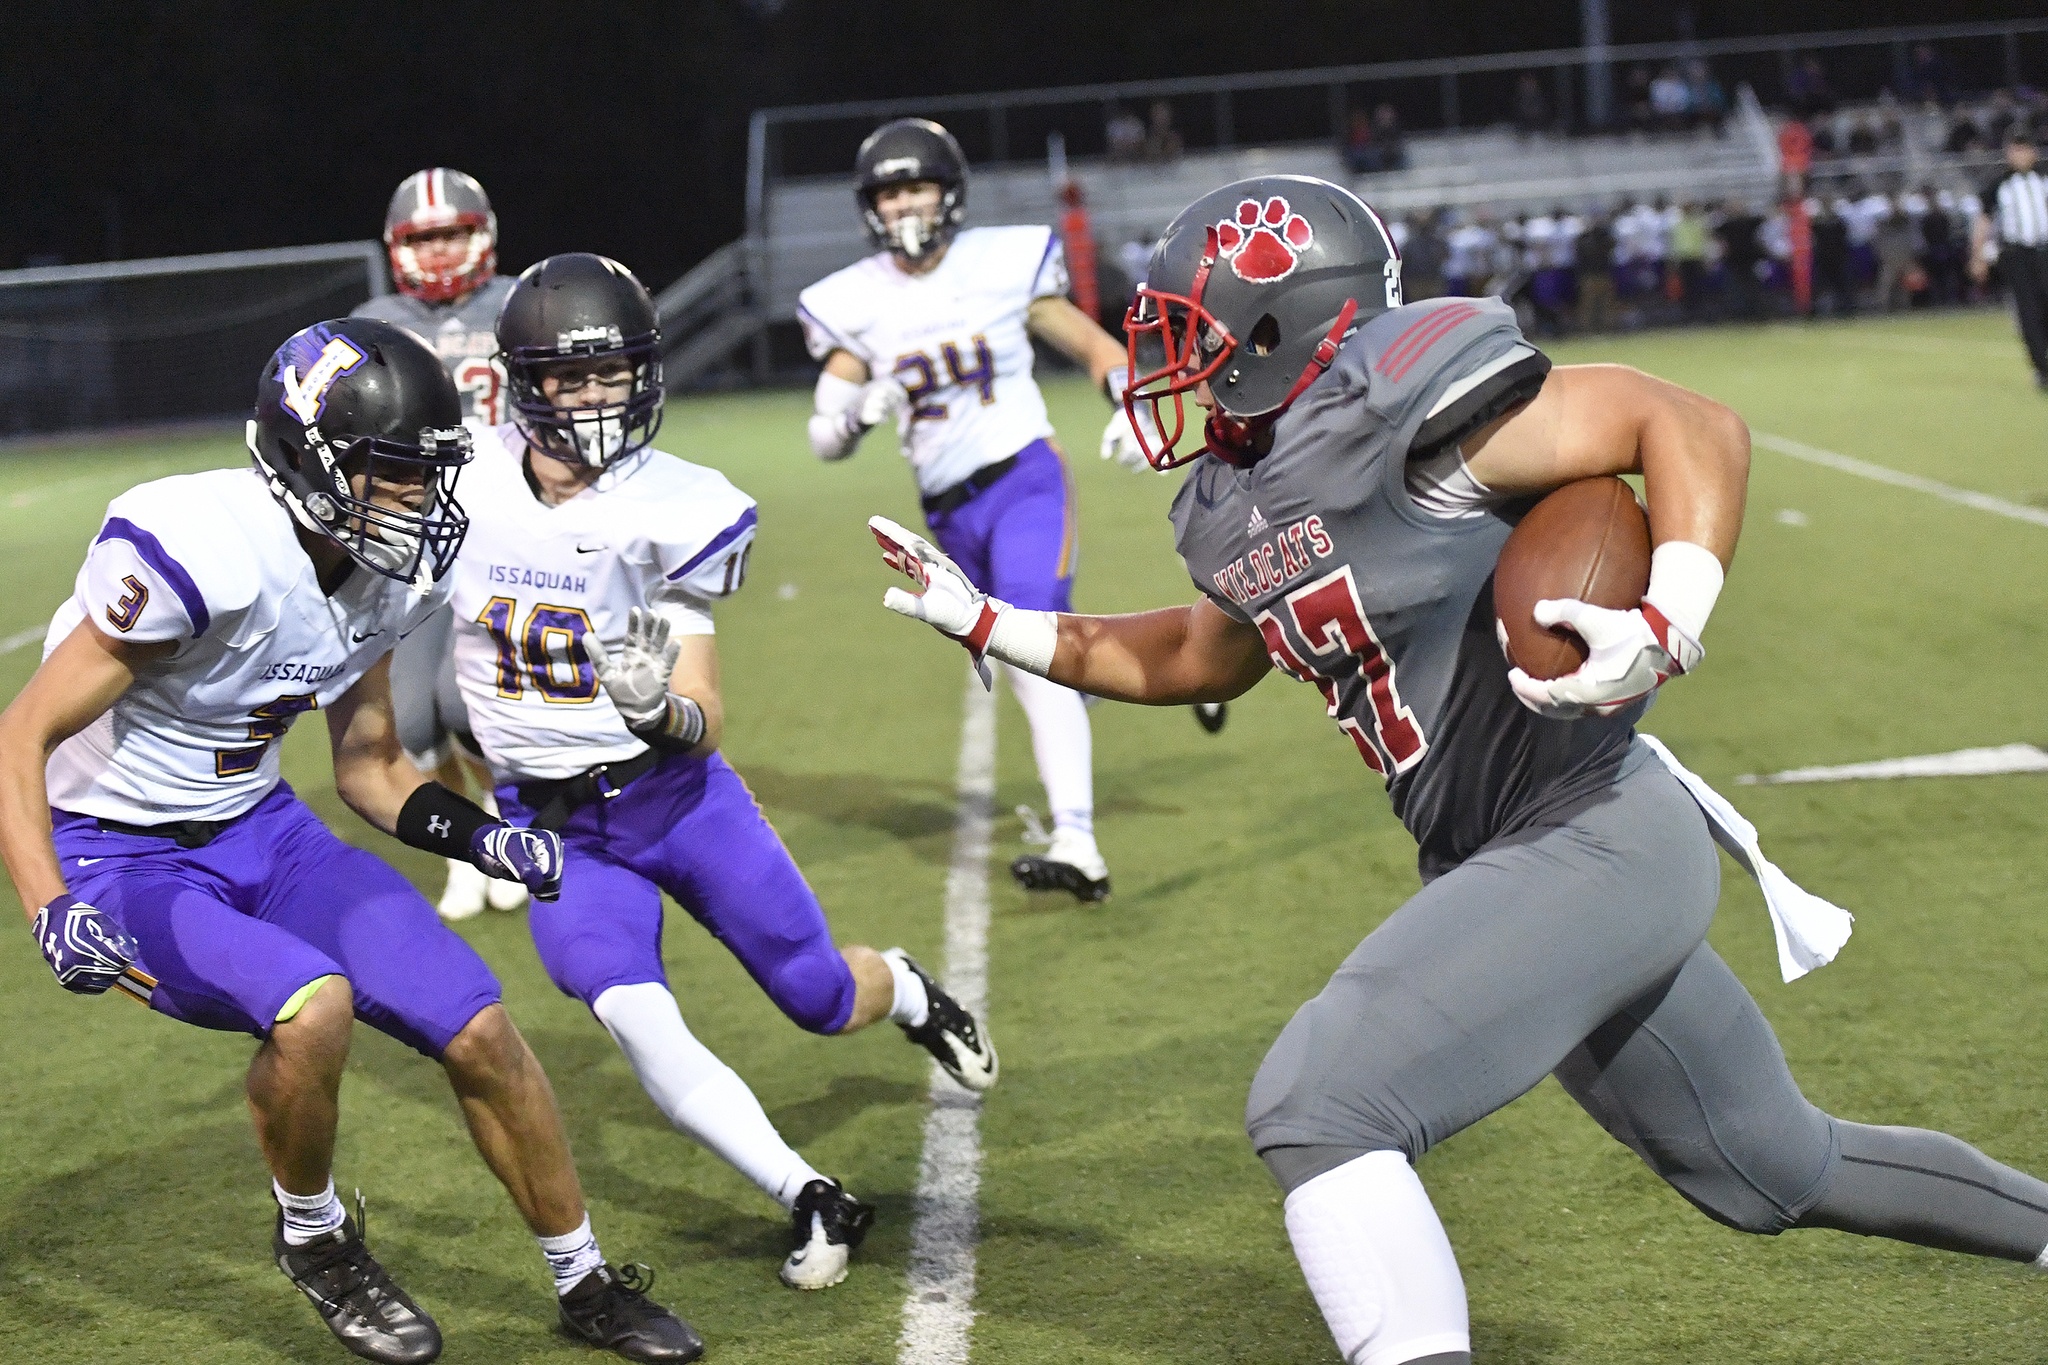 Jack Weidenbach ran the ball for a total of 33 yards in Mount Si’s game Friday night against Issaquah.Photo courtesy of Calder Productions